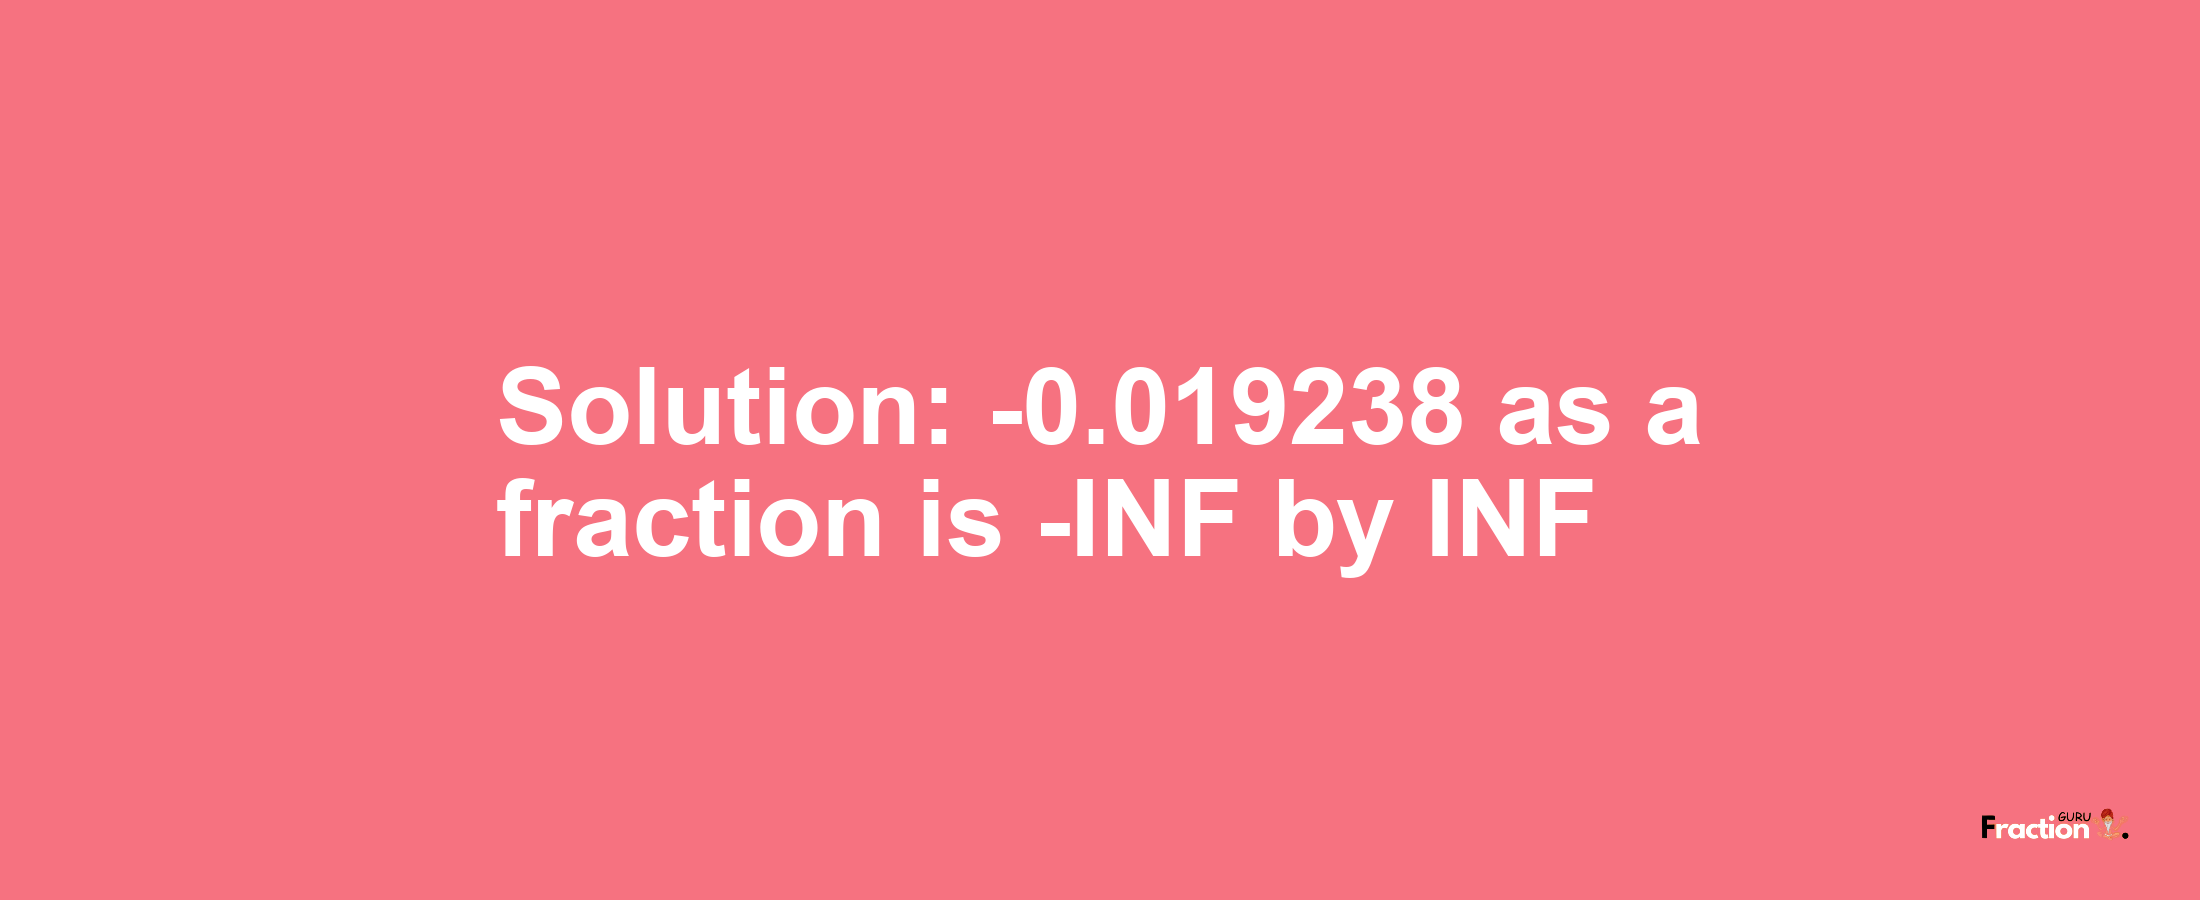 Solution:-0.019238 as a fraction is -INF/INF